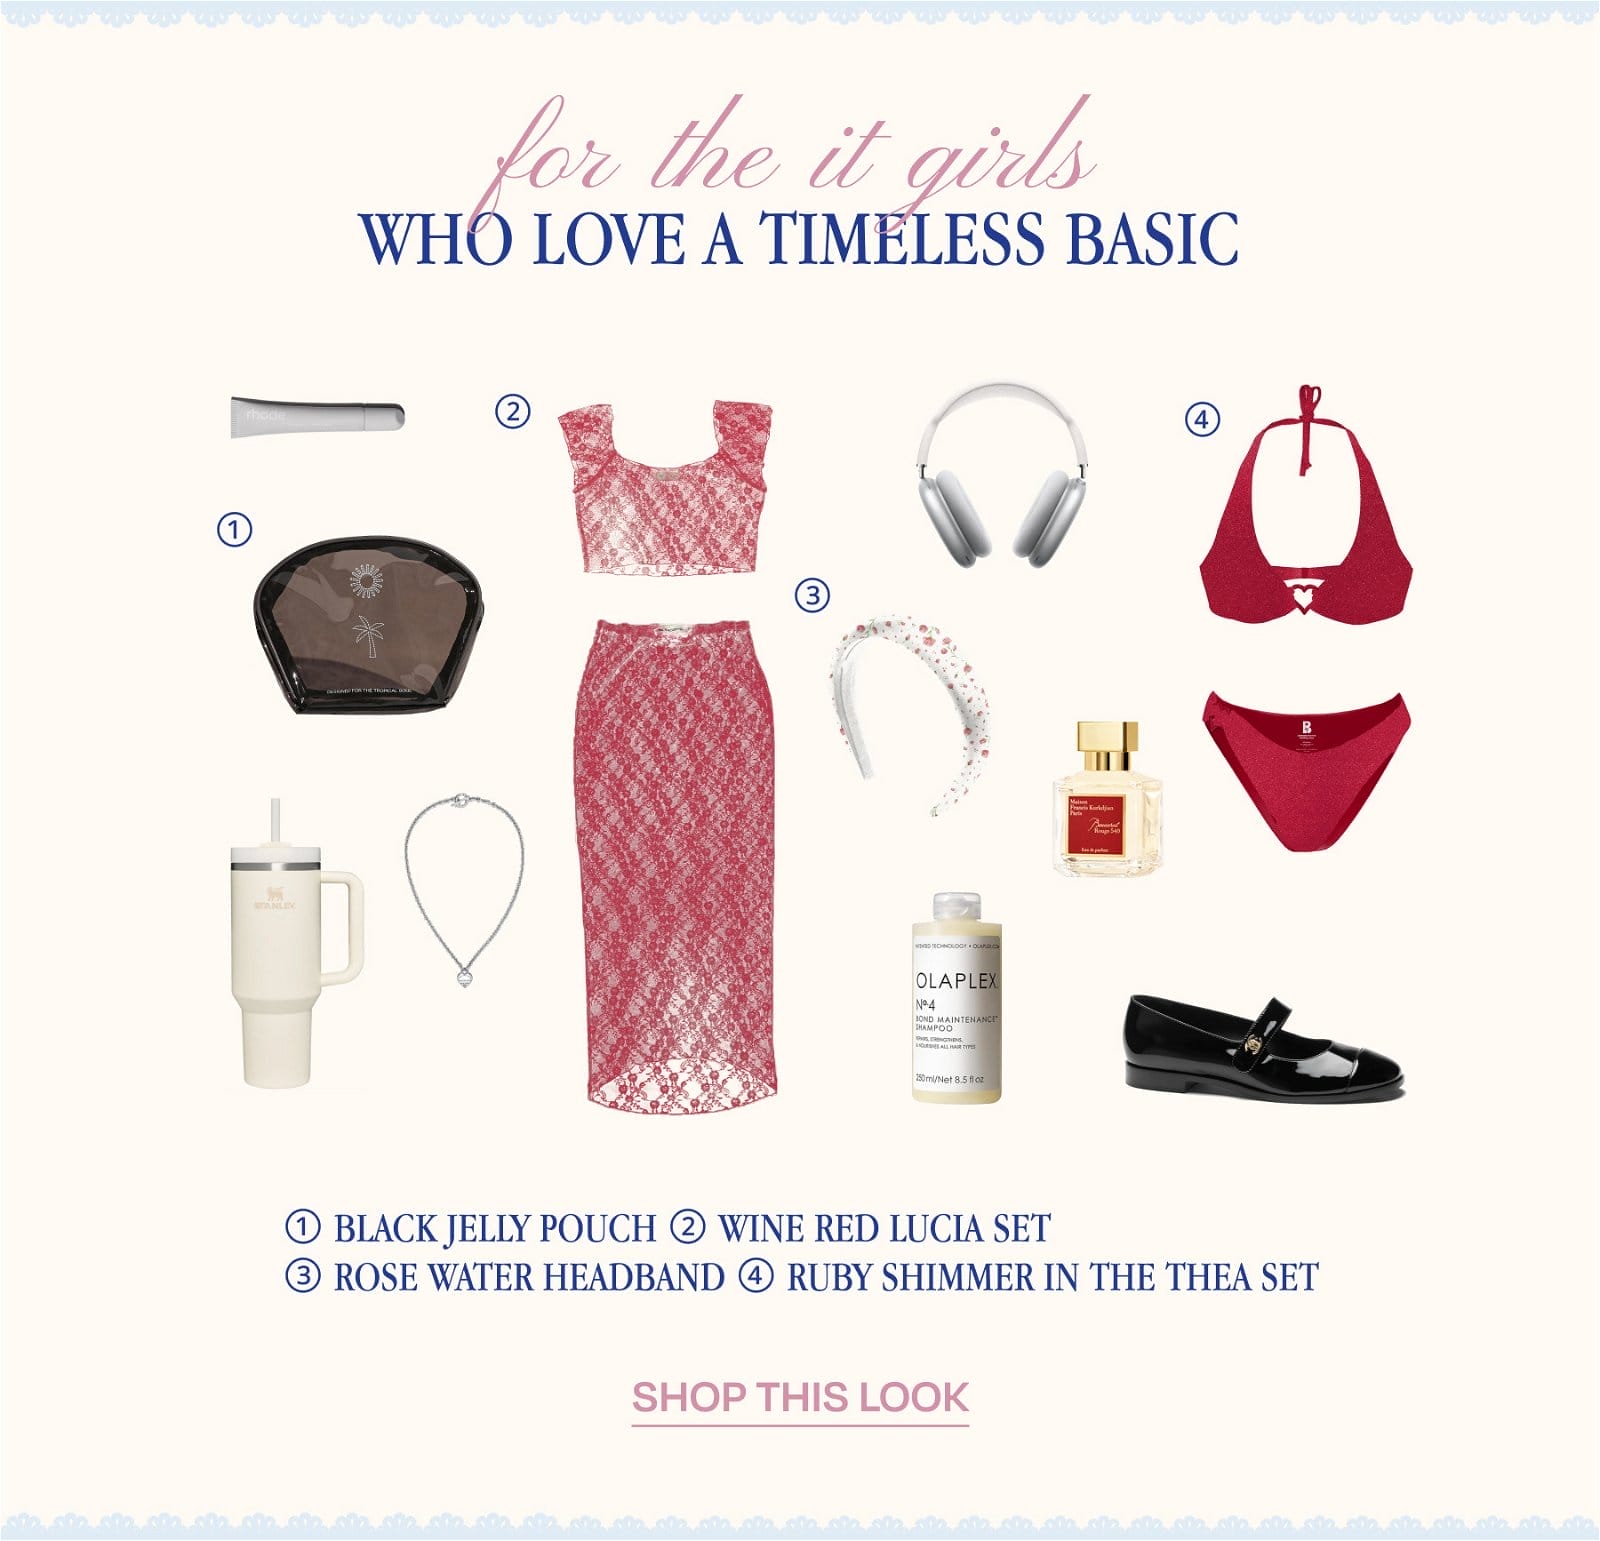 FOR THE IT GIRLS WHO LOVE A TIMELESS BASIC